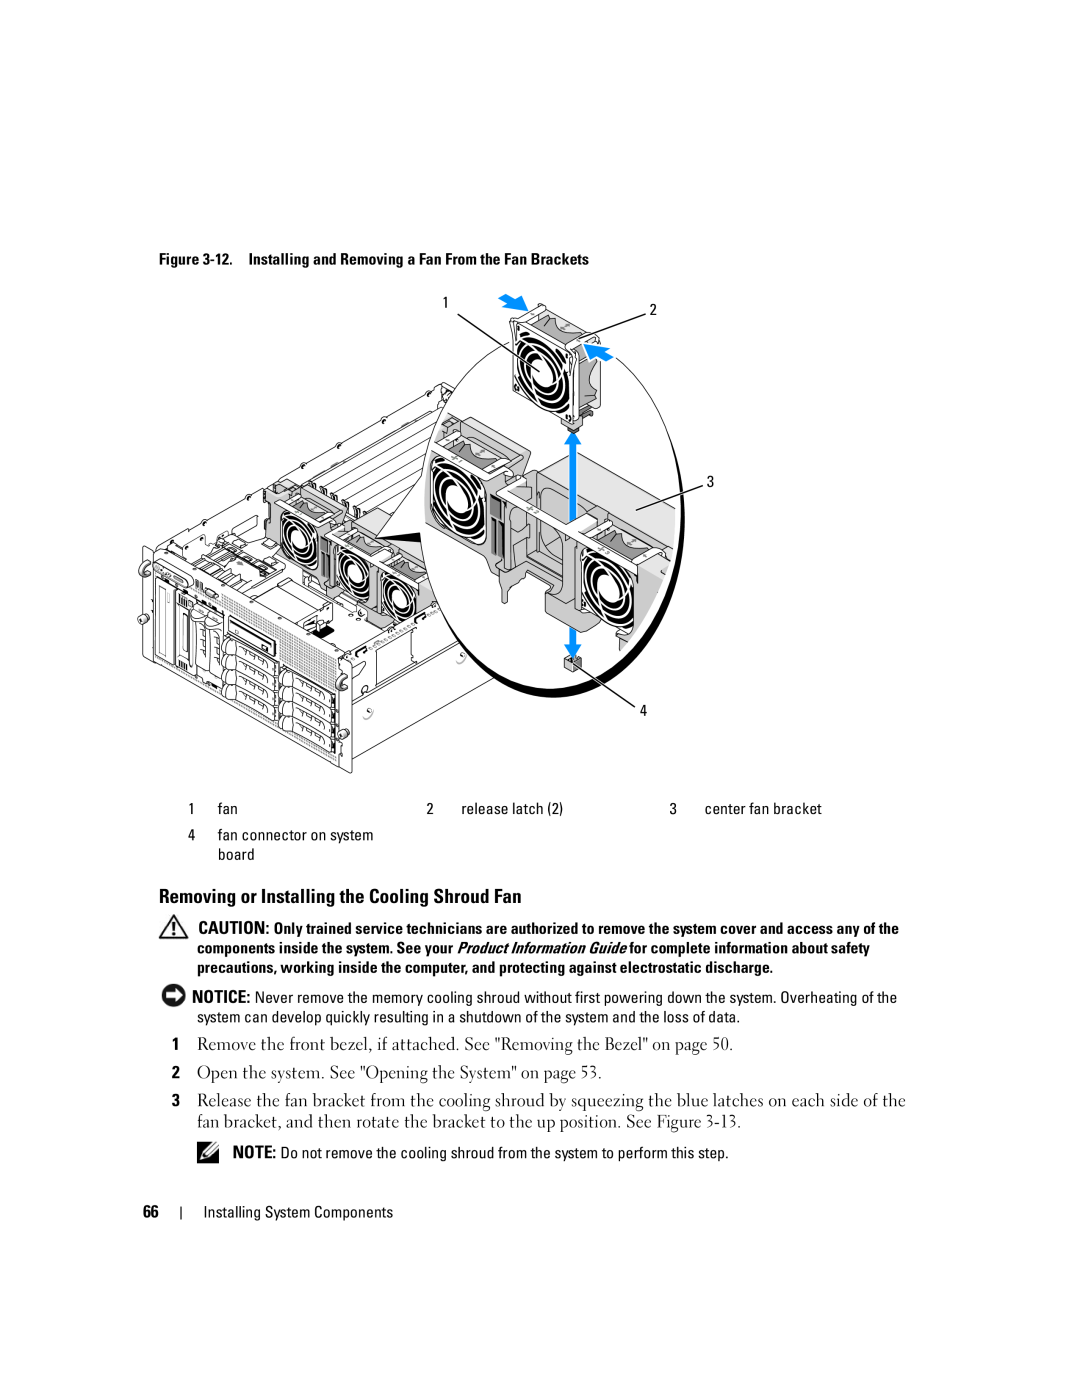 Dell 2900 owner manual Removing or Installing the Cooling Shroud Fan, Open the system. See Opening the System on page 